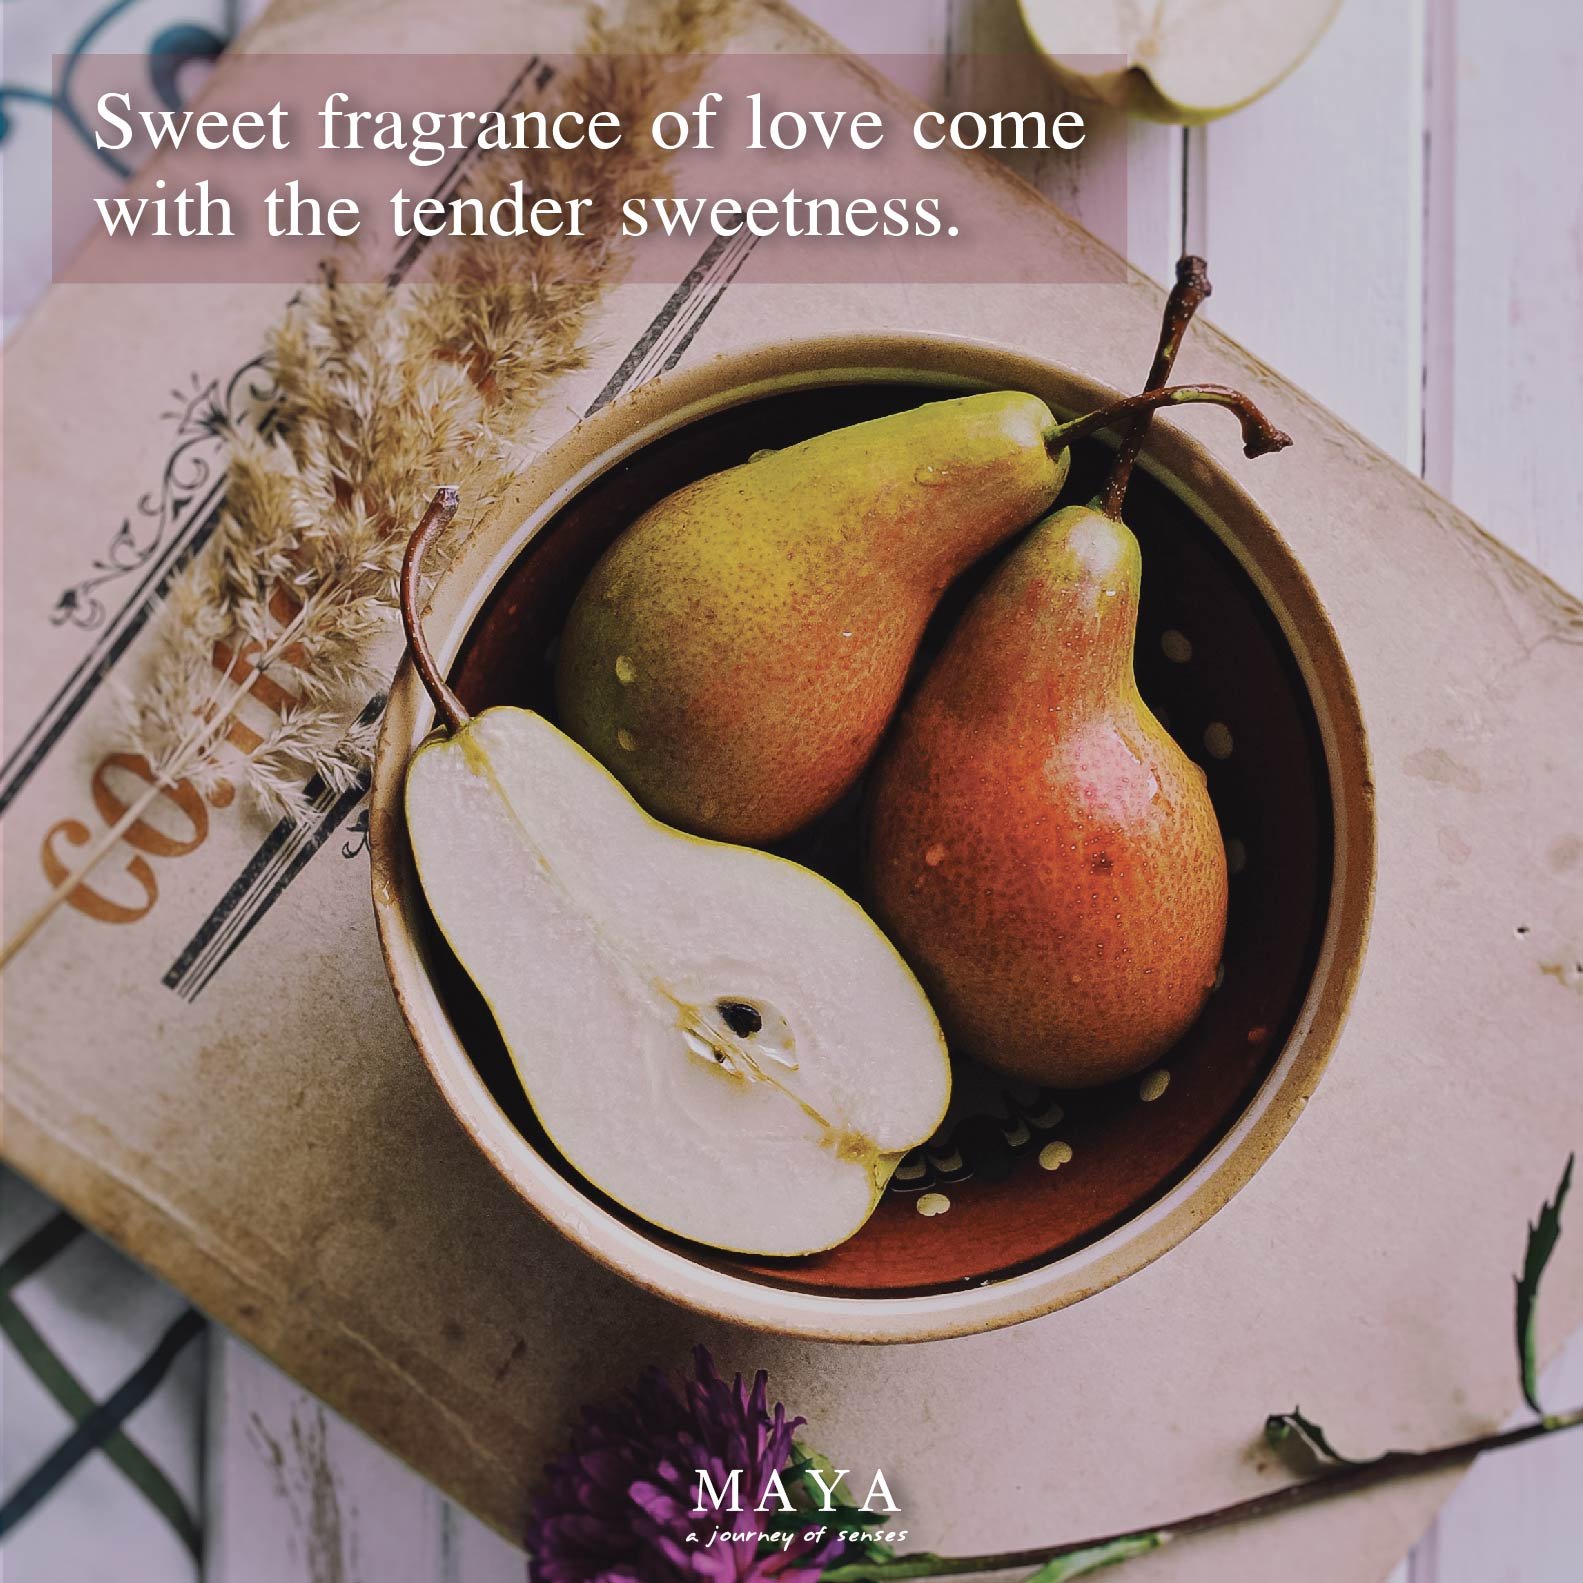 Reed Diffuser Pear & Freesia sweet fragrance of love come with the tender sweetness.